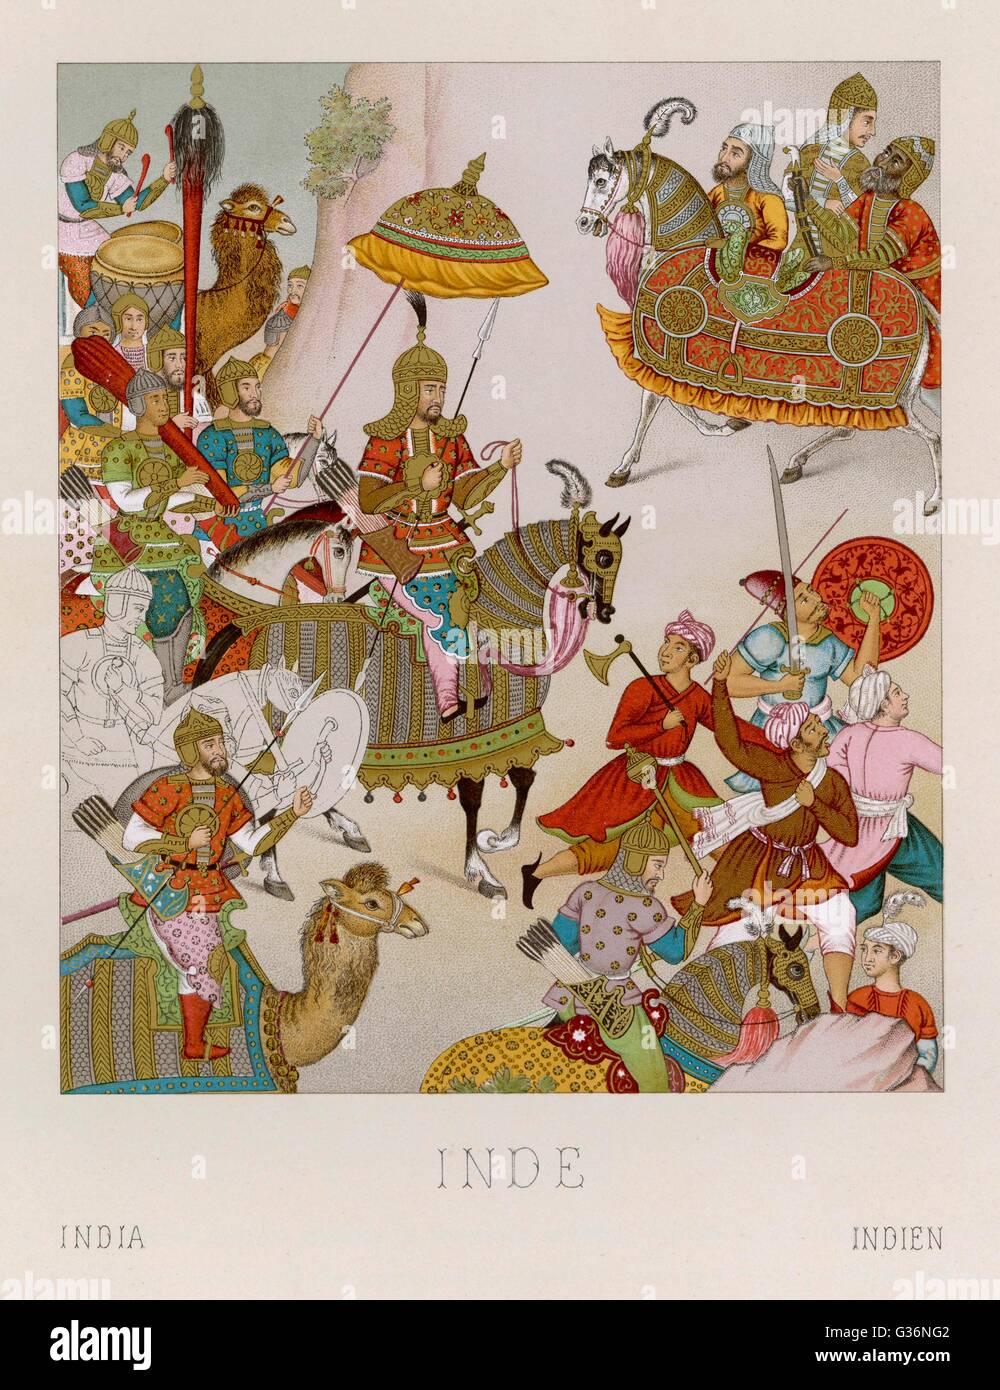 Babur (1483-1531), Mughal Emperor of India (ruled 1526-1530), depicted with his army invading Persia.      Date: circa 1526 Stock Photo